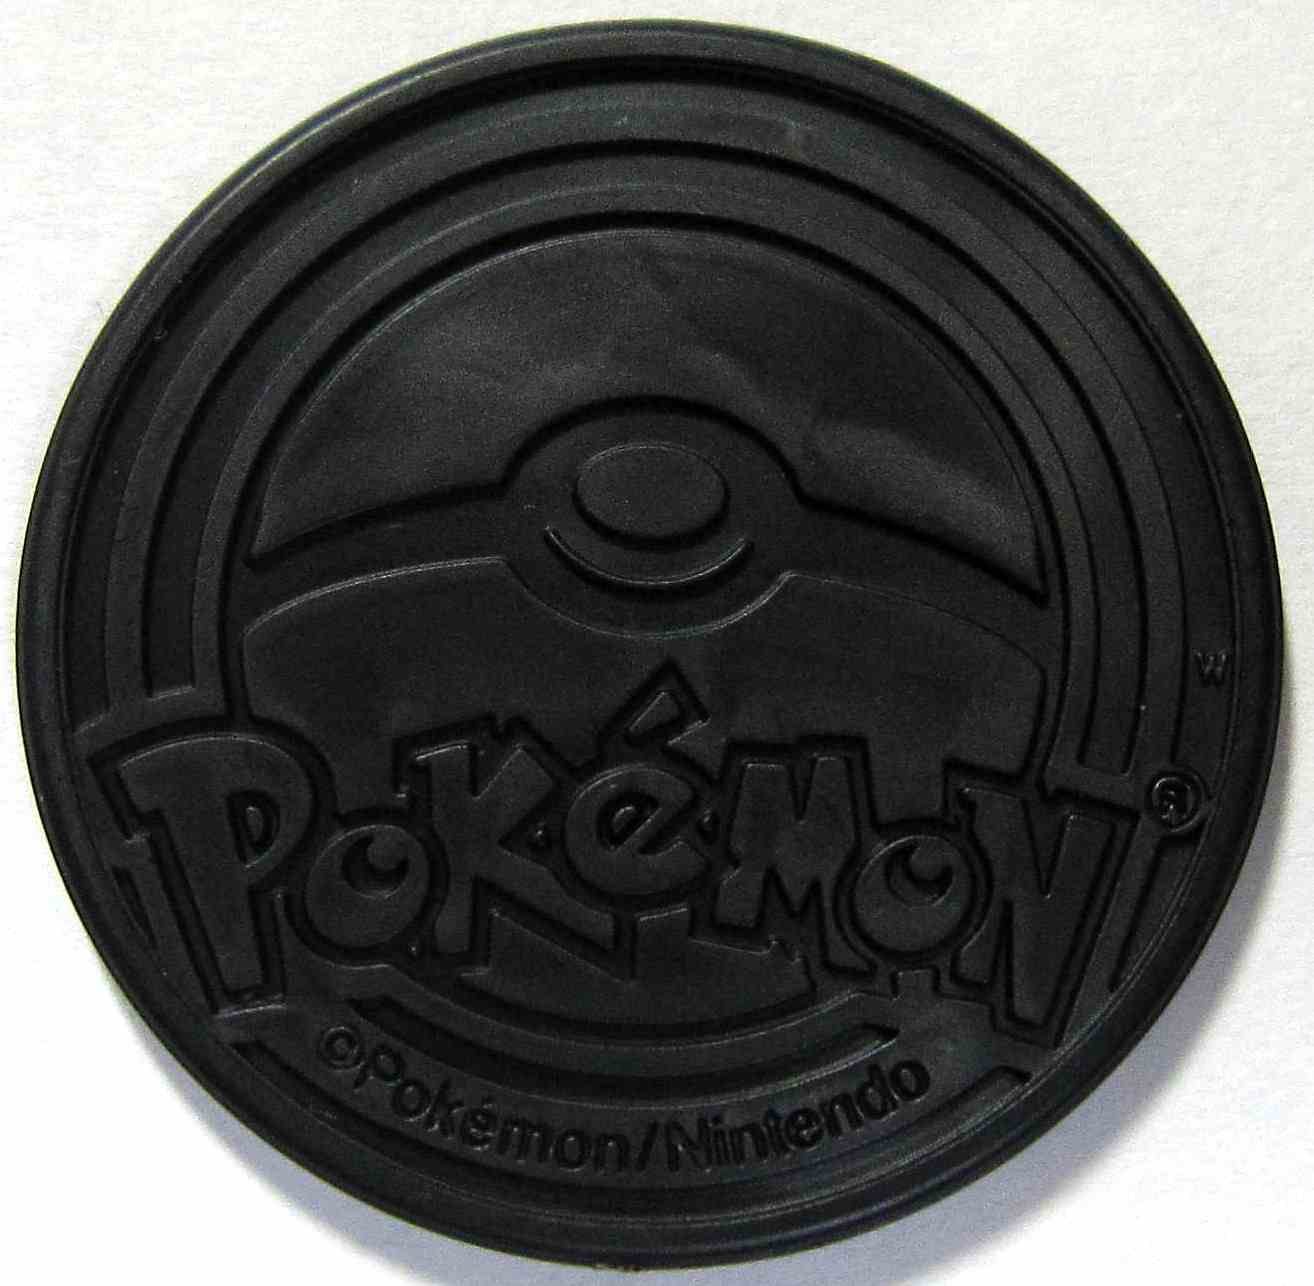 red pokemon coins